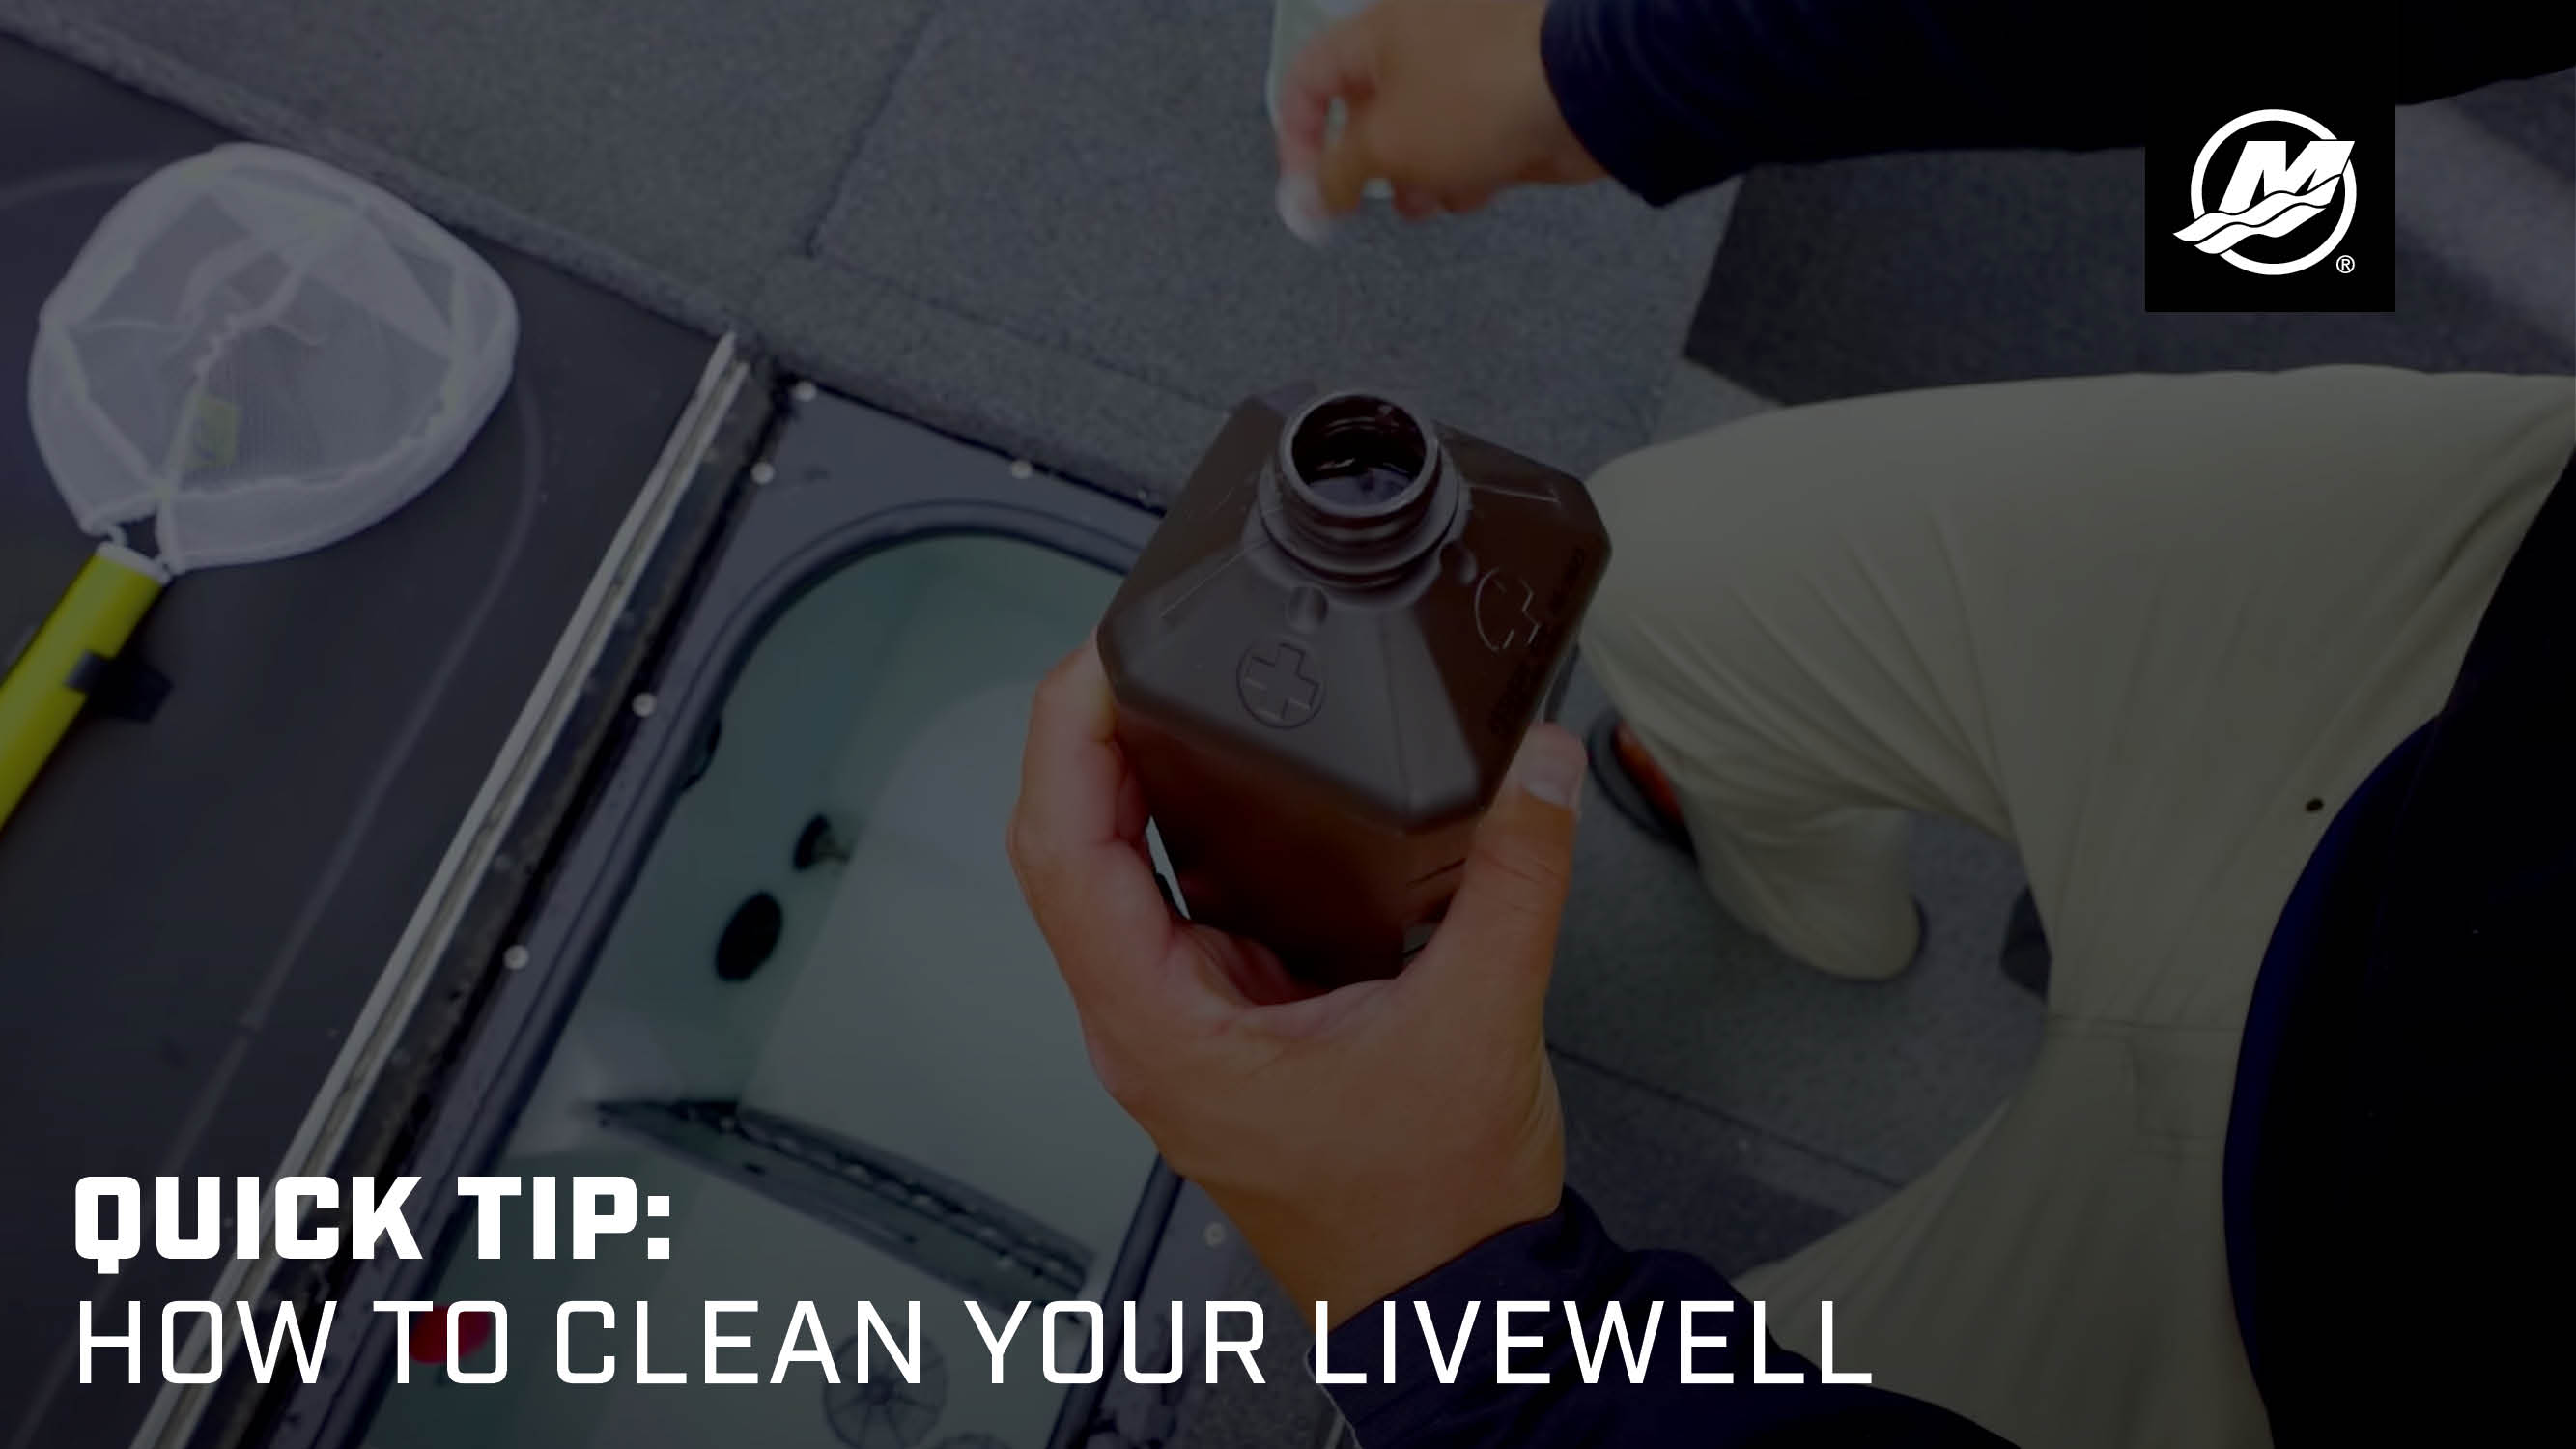 Quick Tip: How to Clean Your Livewell